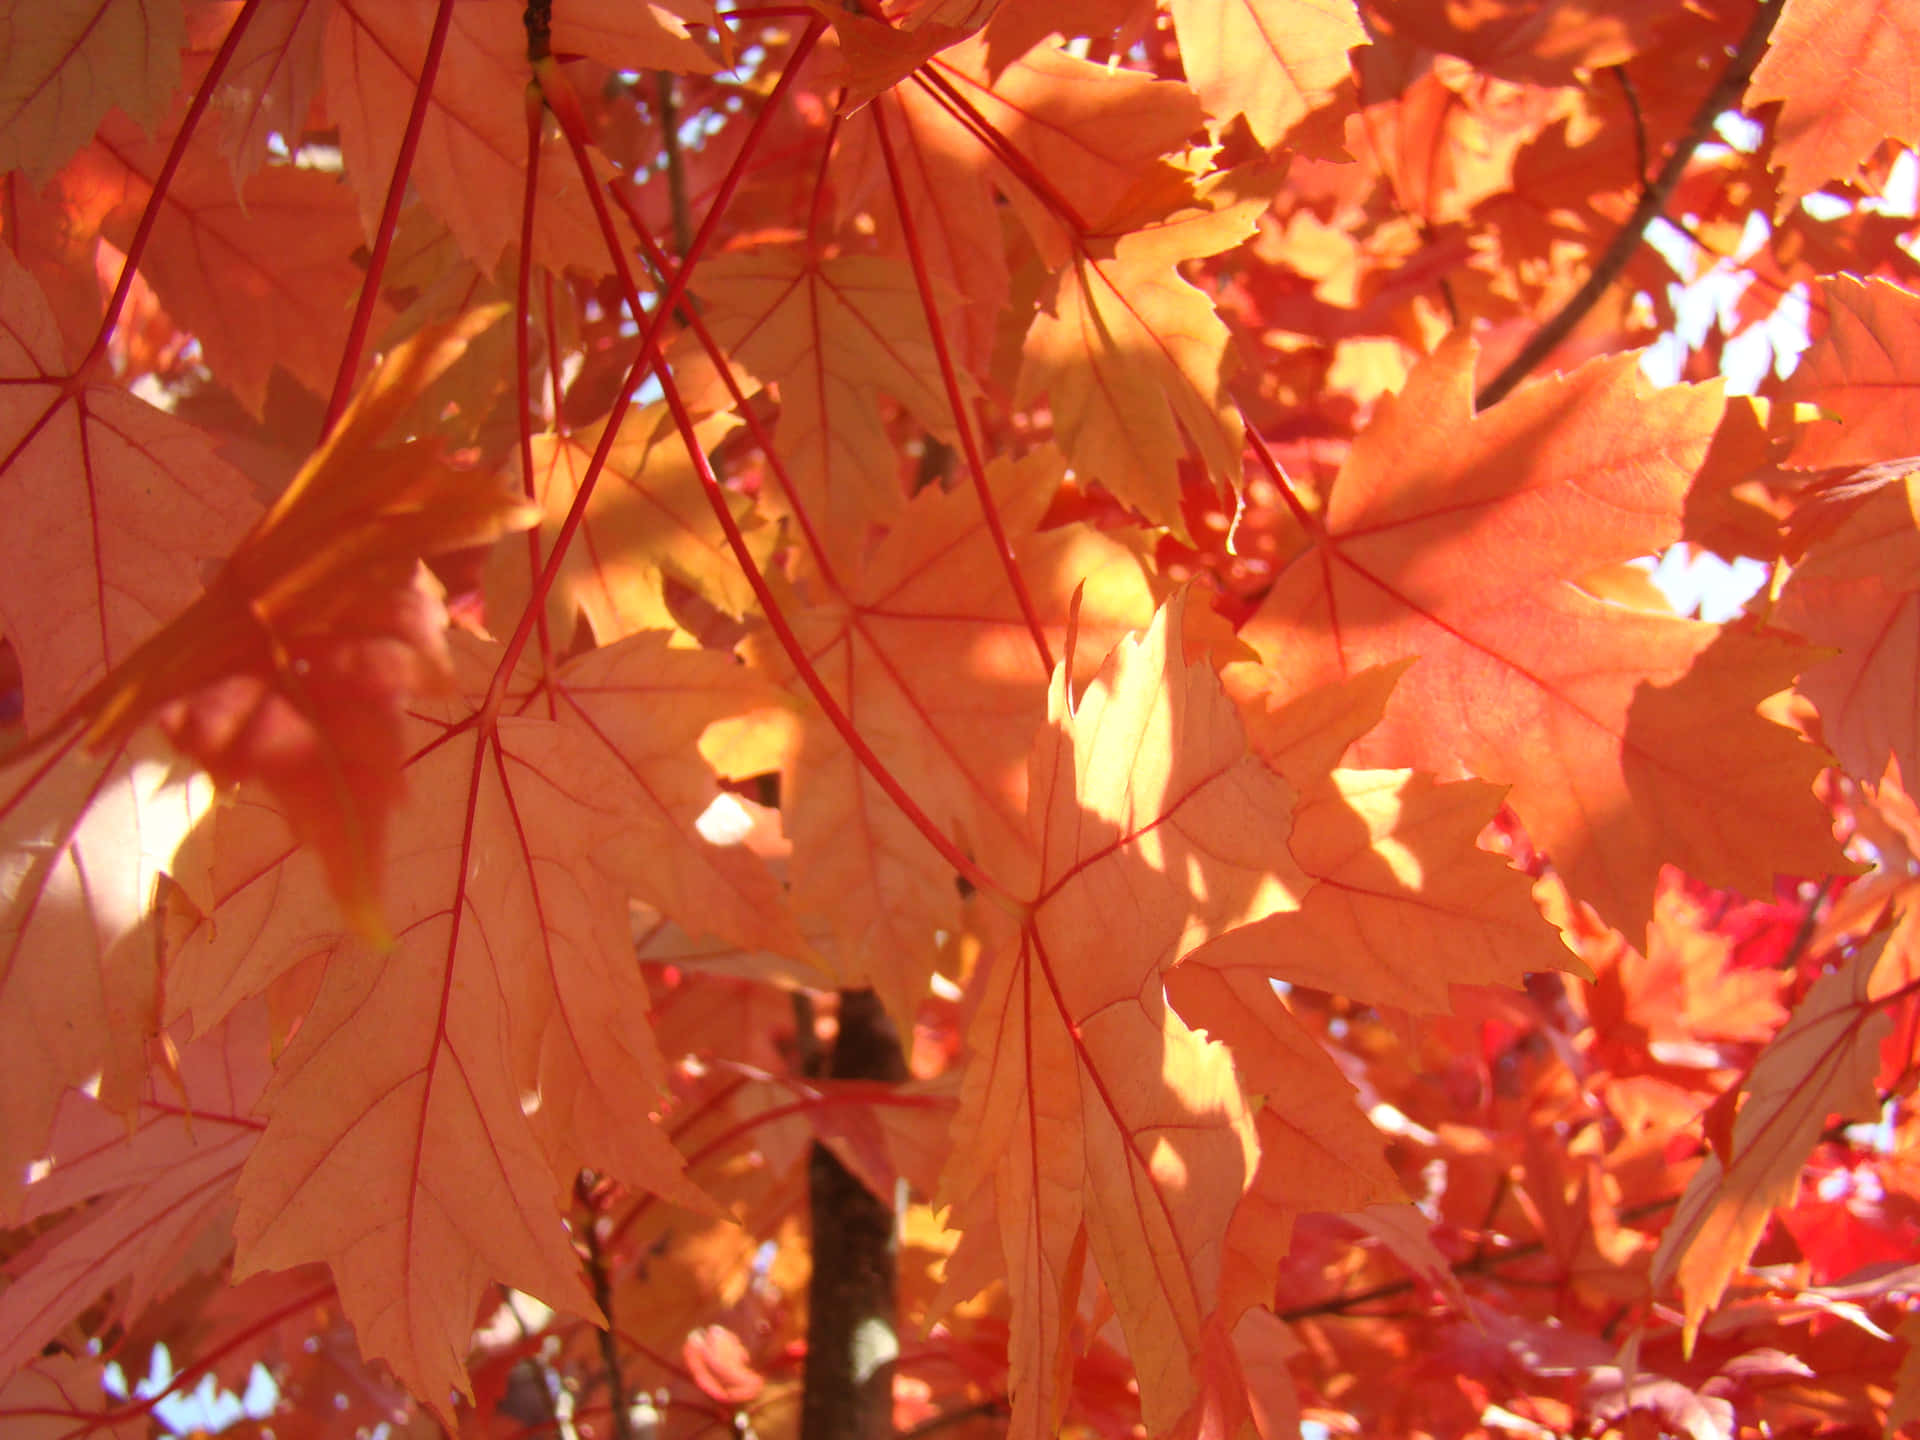 A Close Up Of Some Orange Maple Leaves